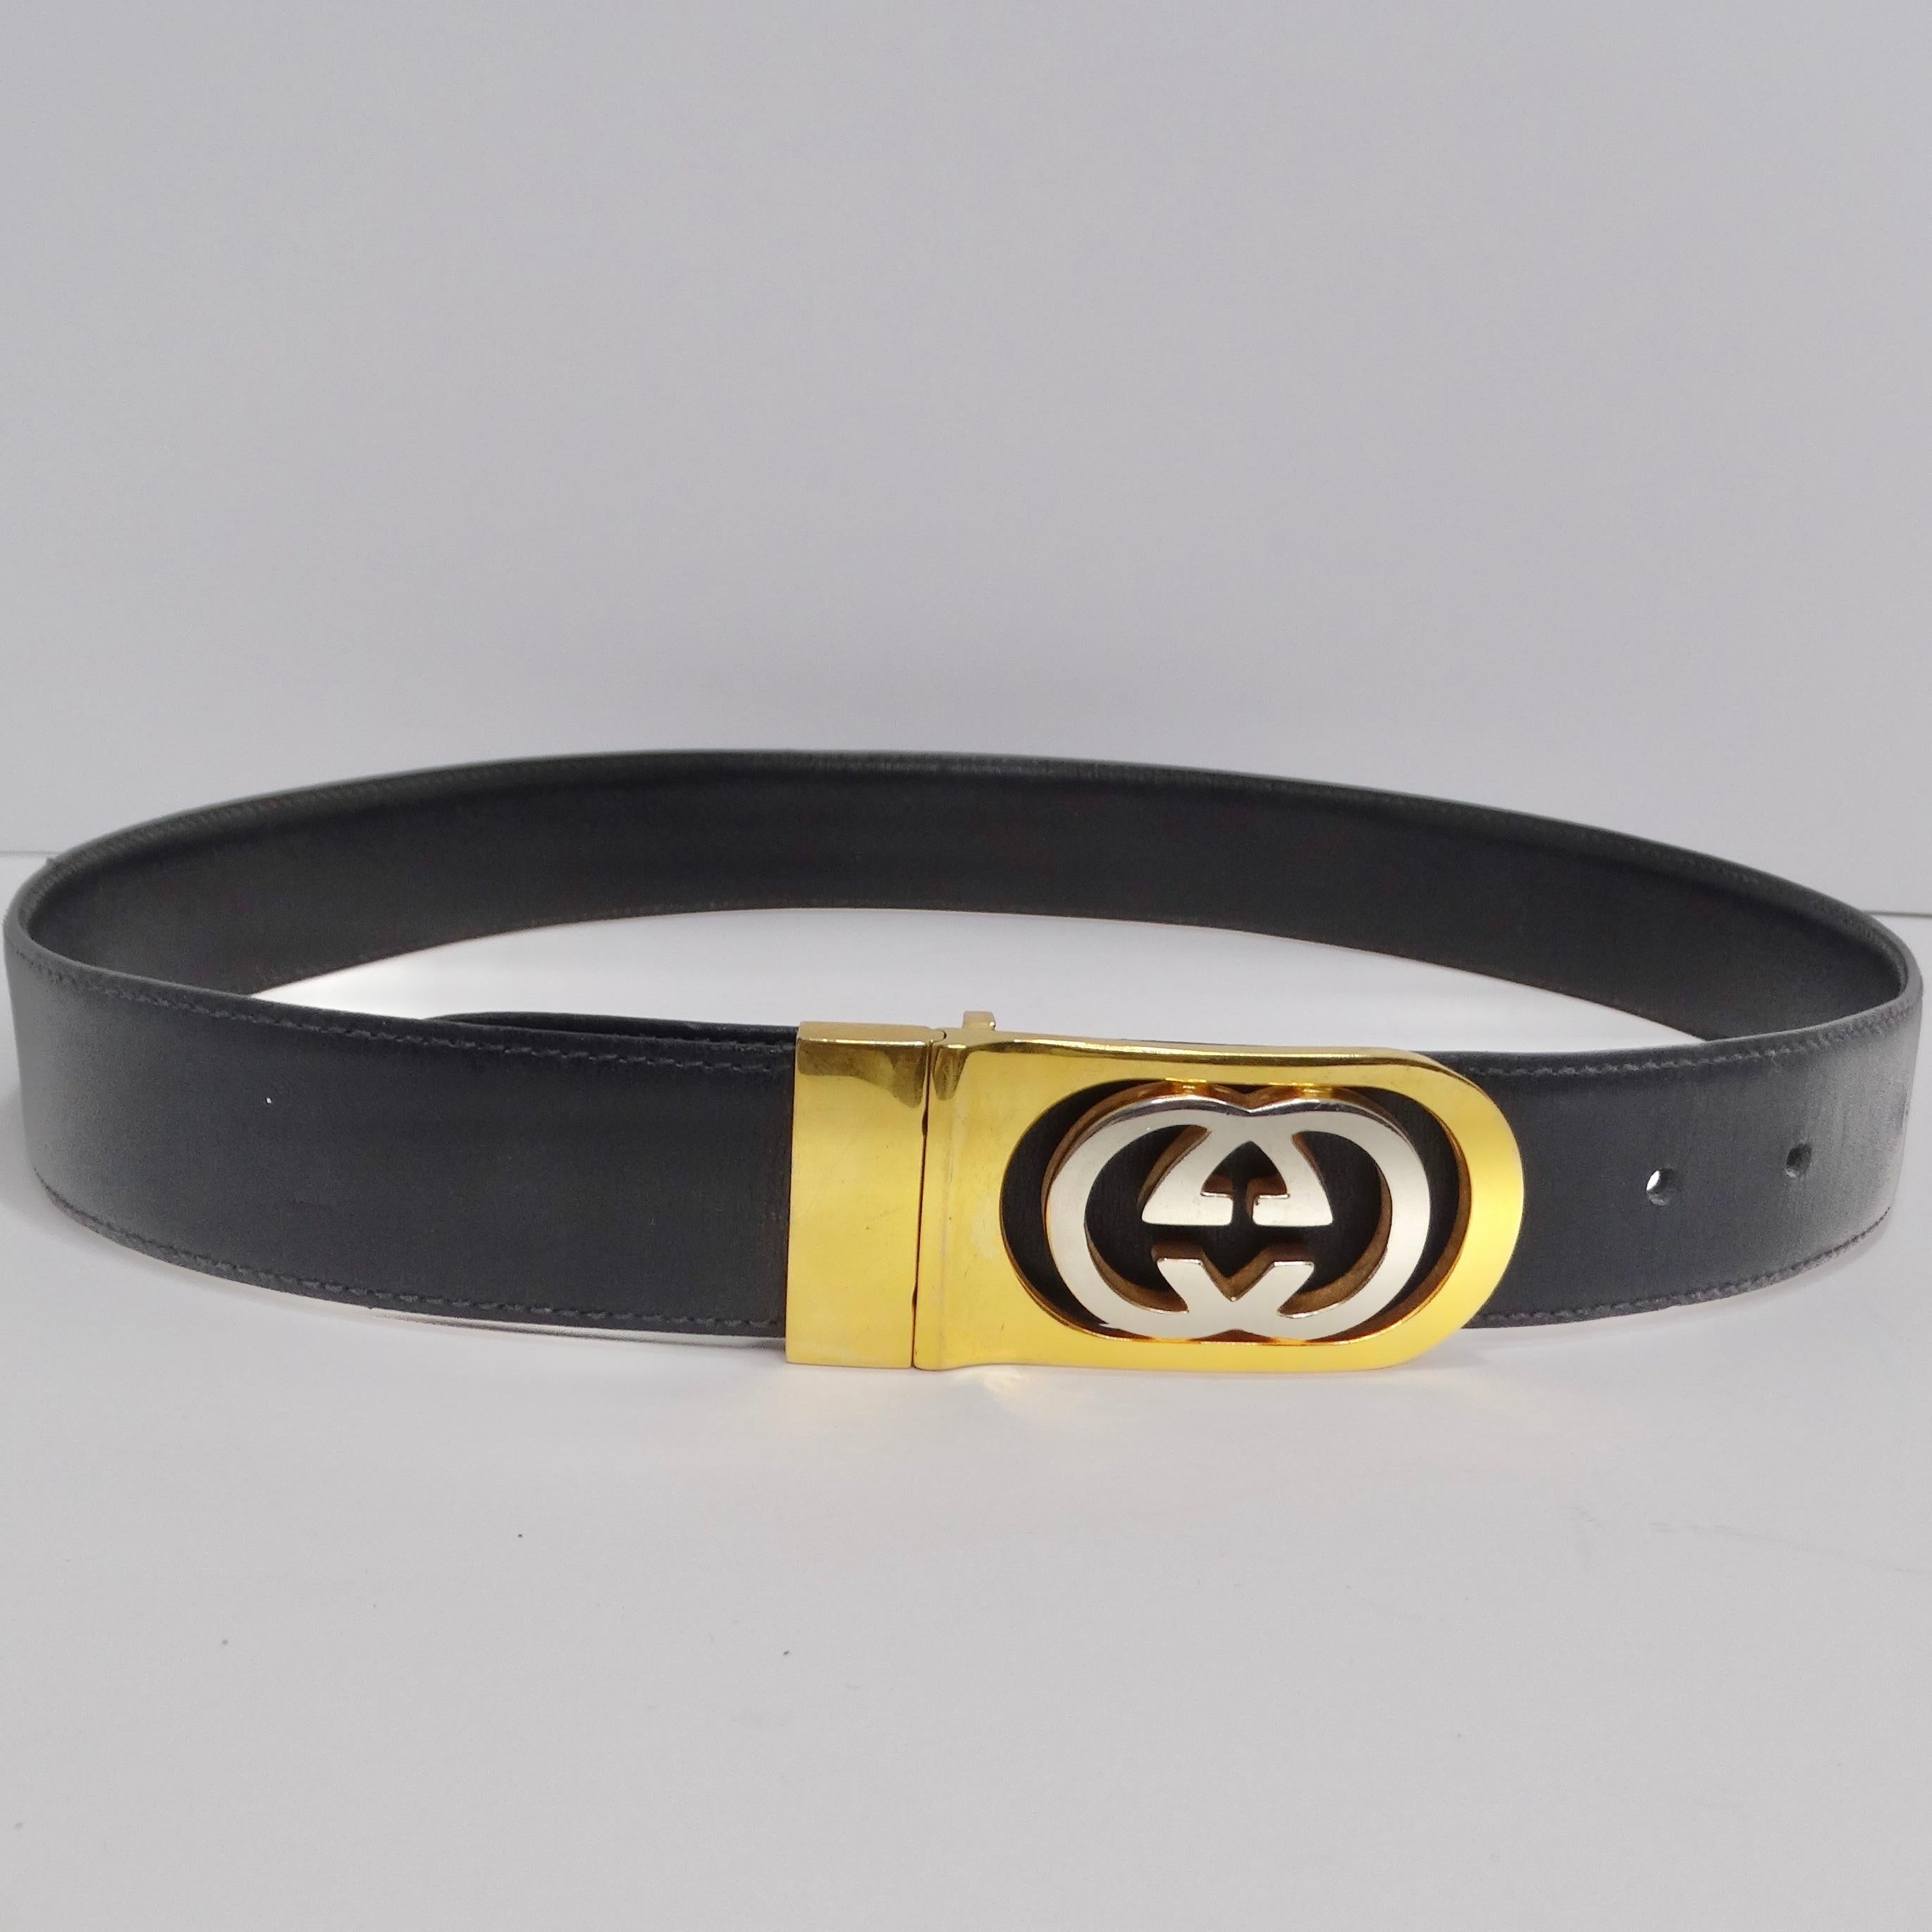 Elevate your style with a touch of vintage glamour courtesy of this Gucci masterpiece. This classic black leather belt is a testament to timeless fashion. Its centerpiece is the signature Gucci logo belt buckle, rendered in striking silver and gold